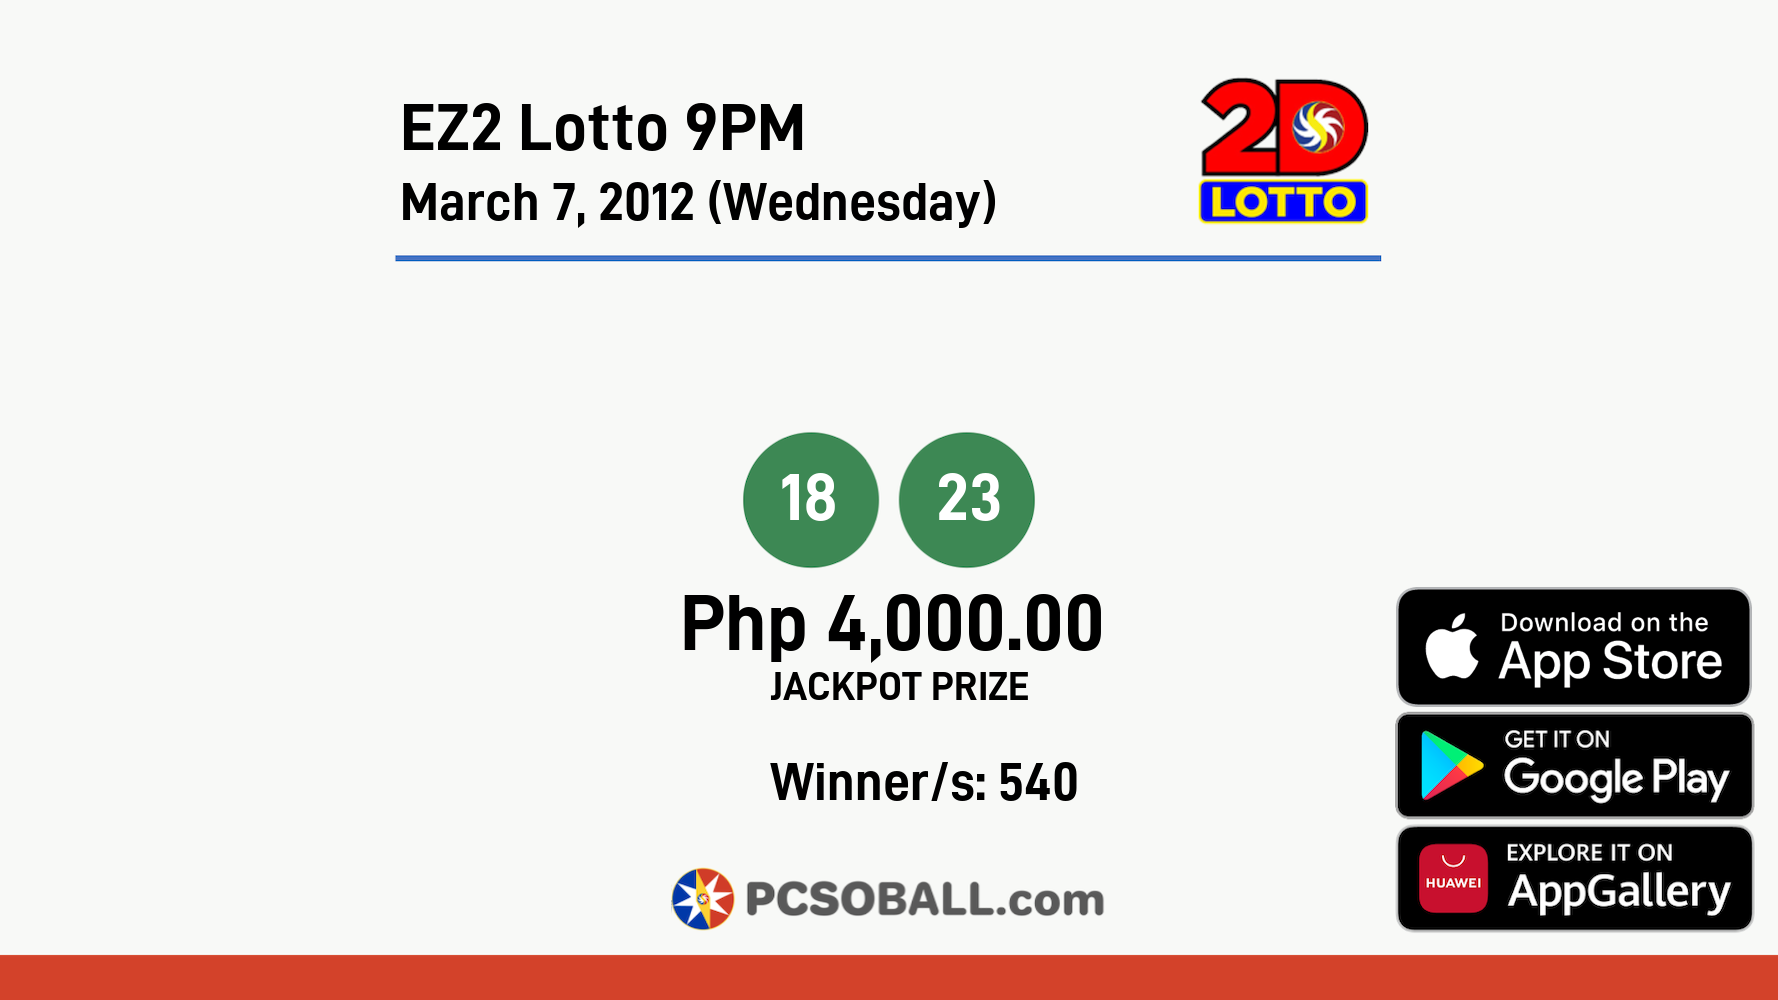 EZ2 Lotto 9PM March 7, 2012 (Wednesday) Result